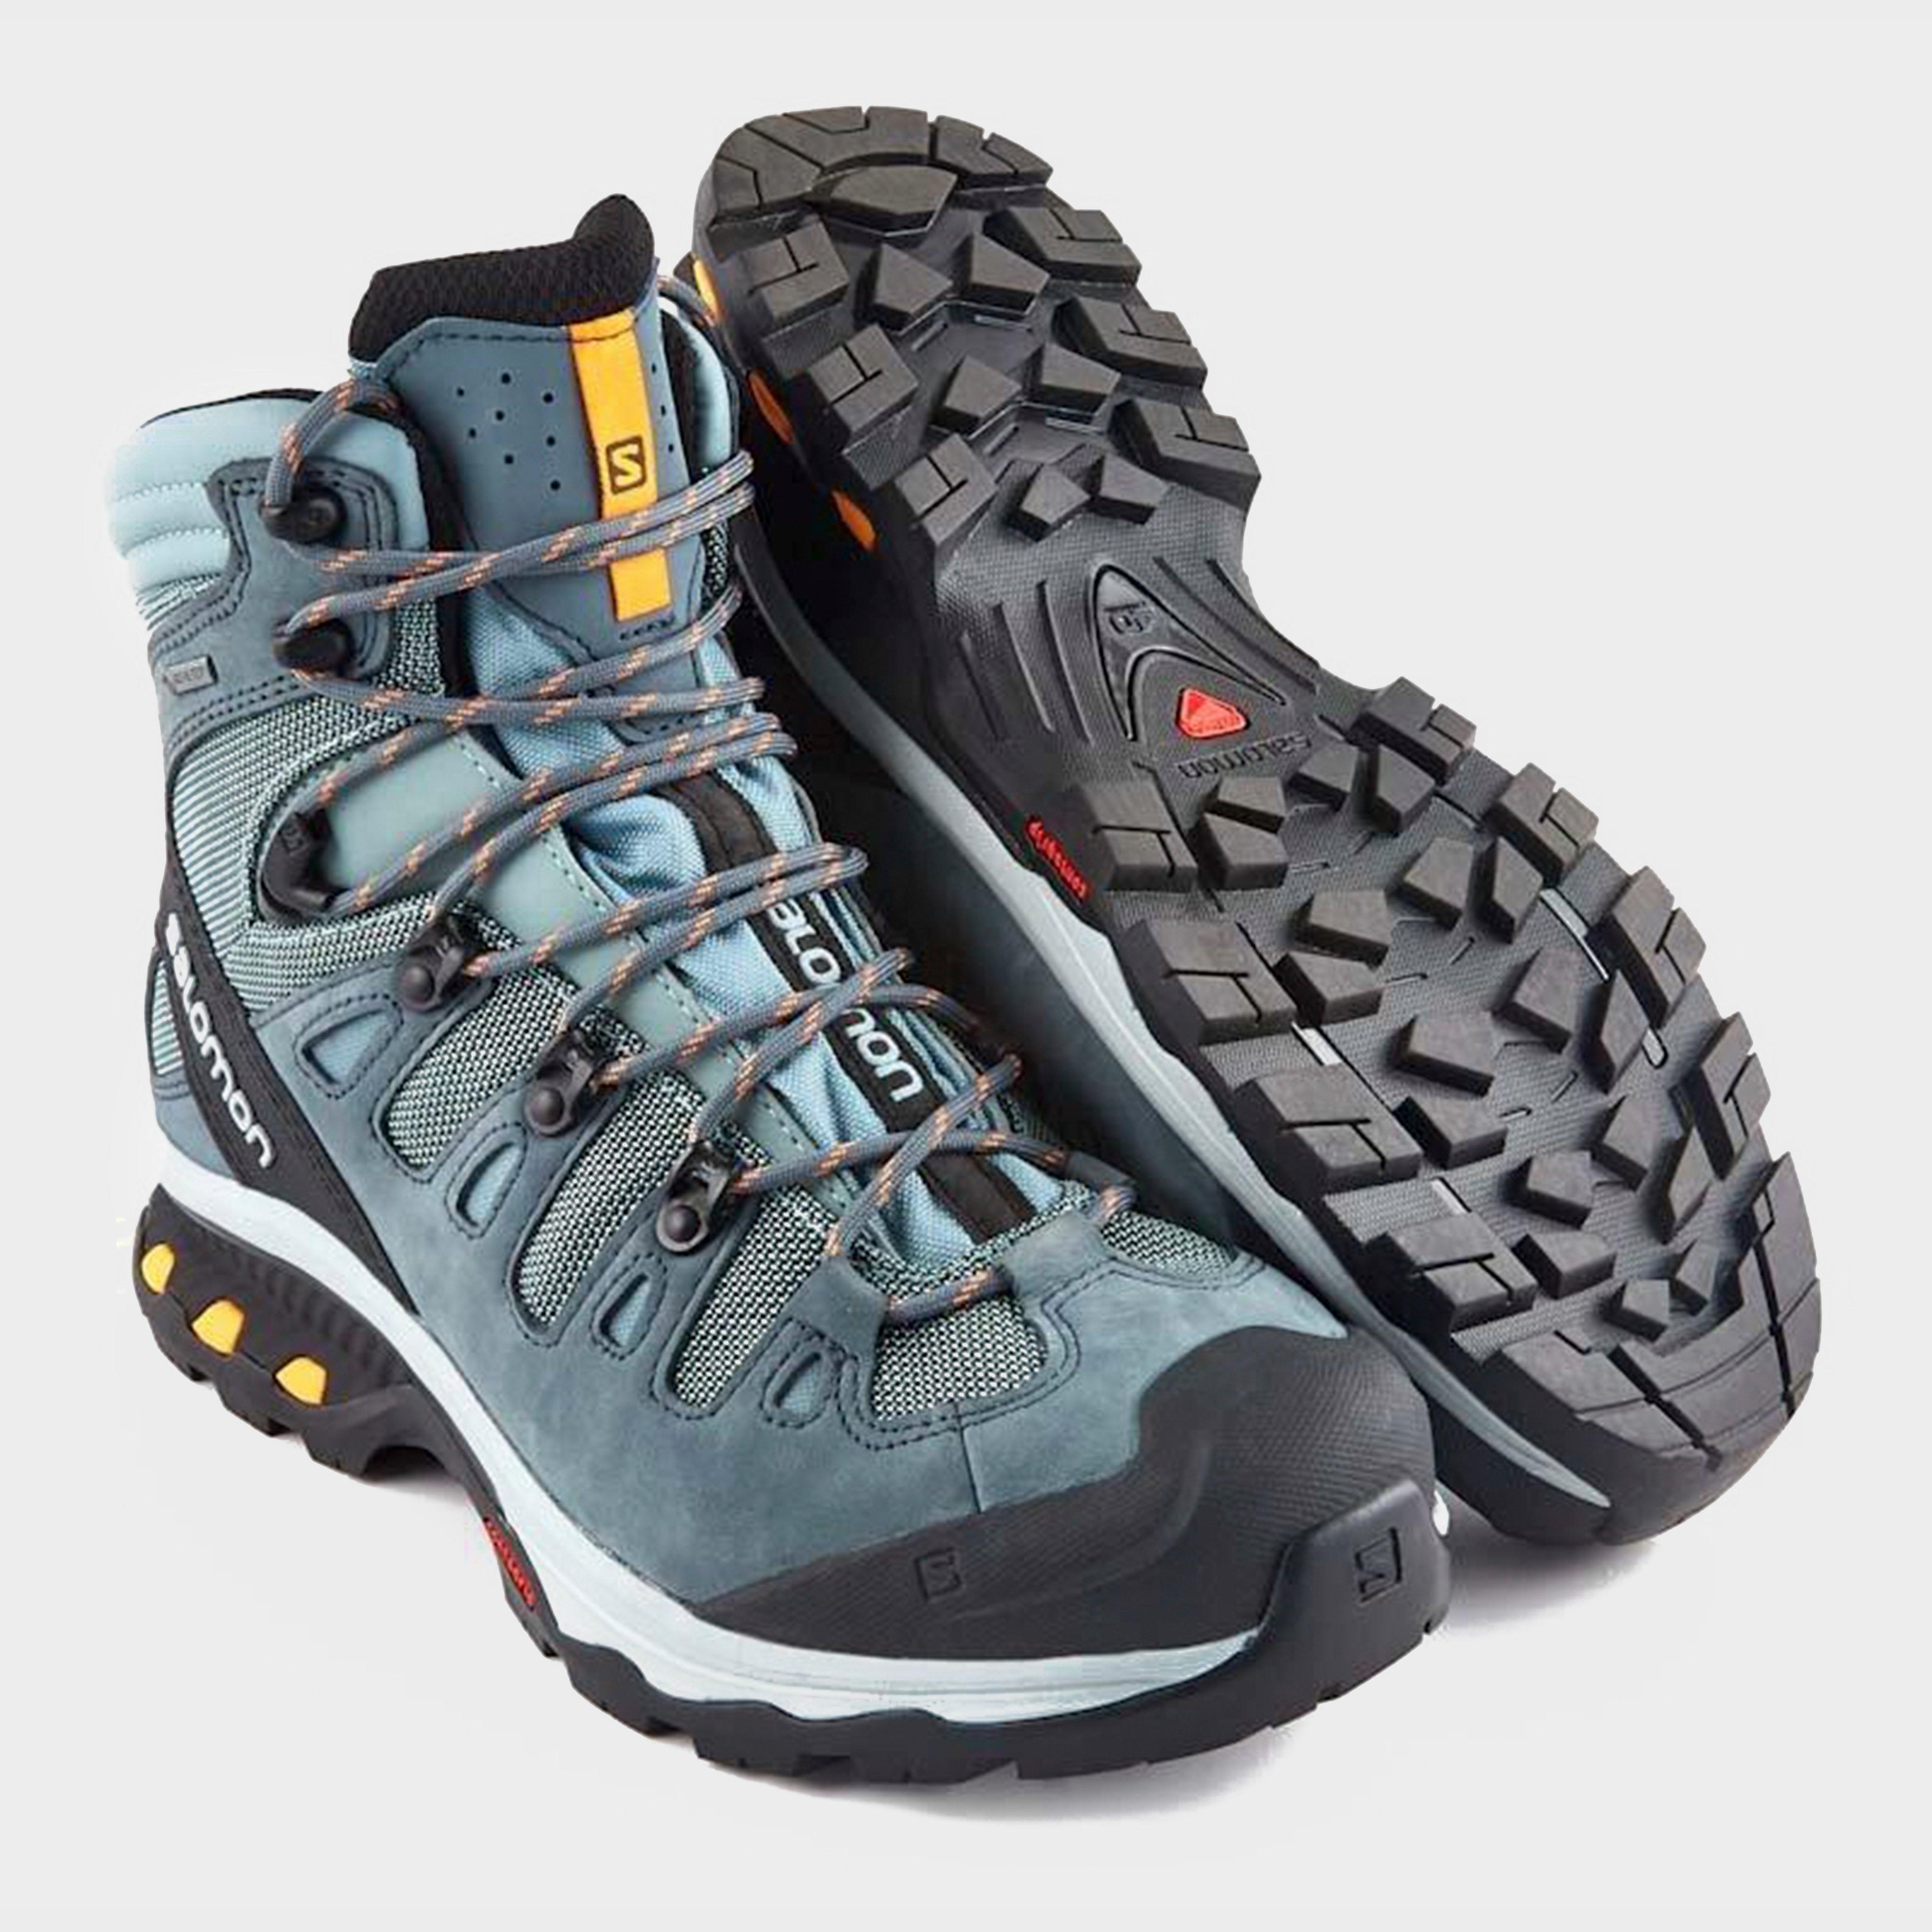 go outdoors womens walking shoes